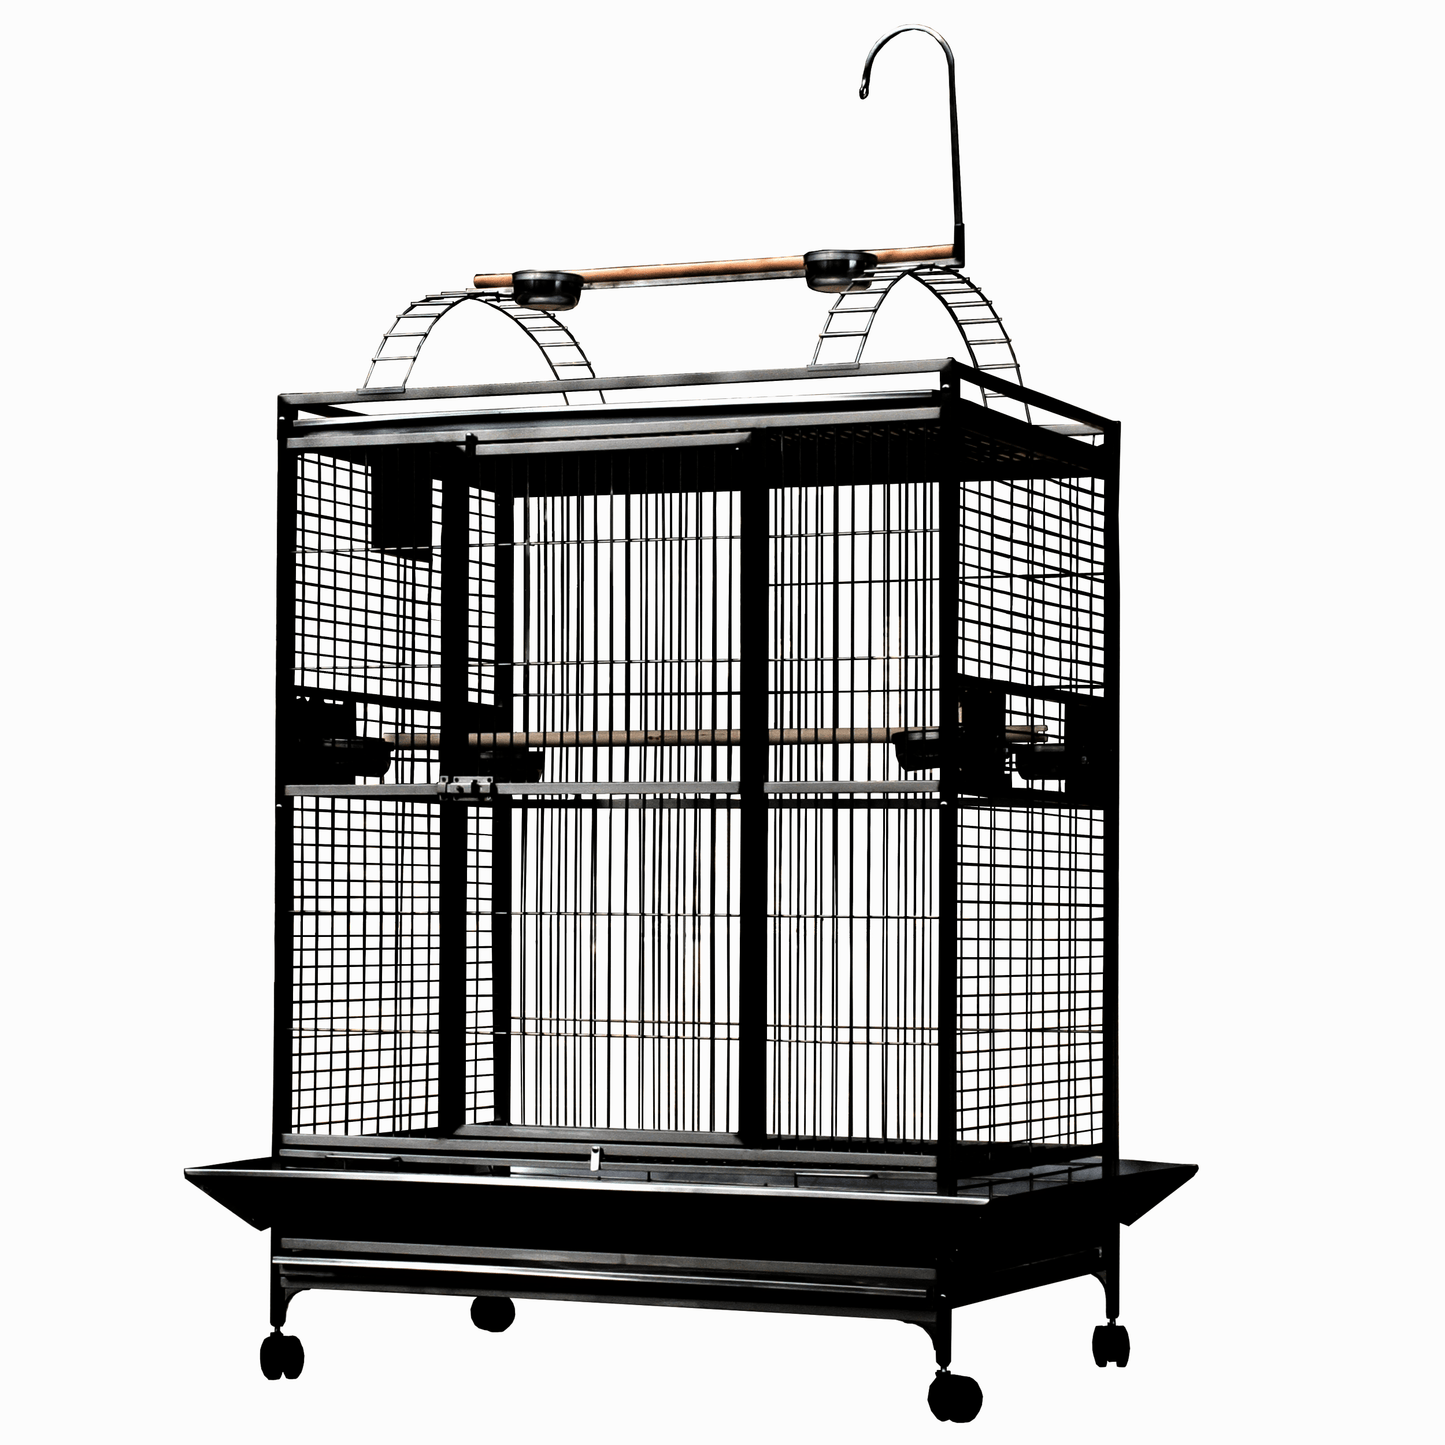 Playtop Cage with 1" Bar Spacing 48"x36"